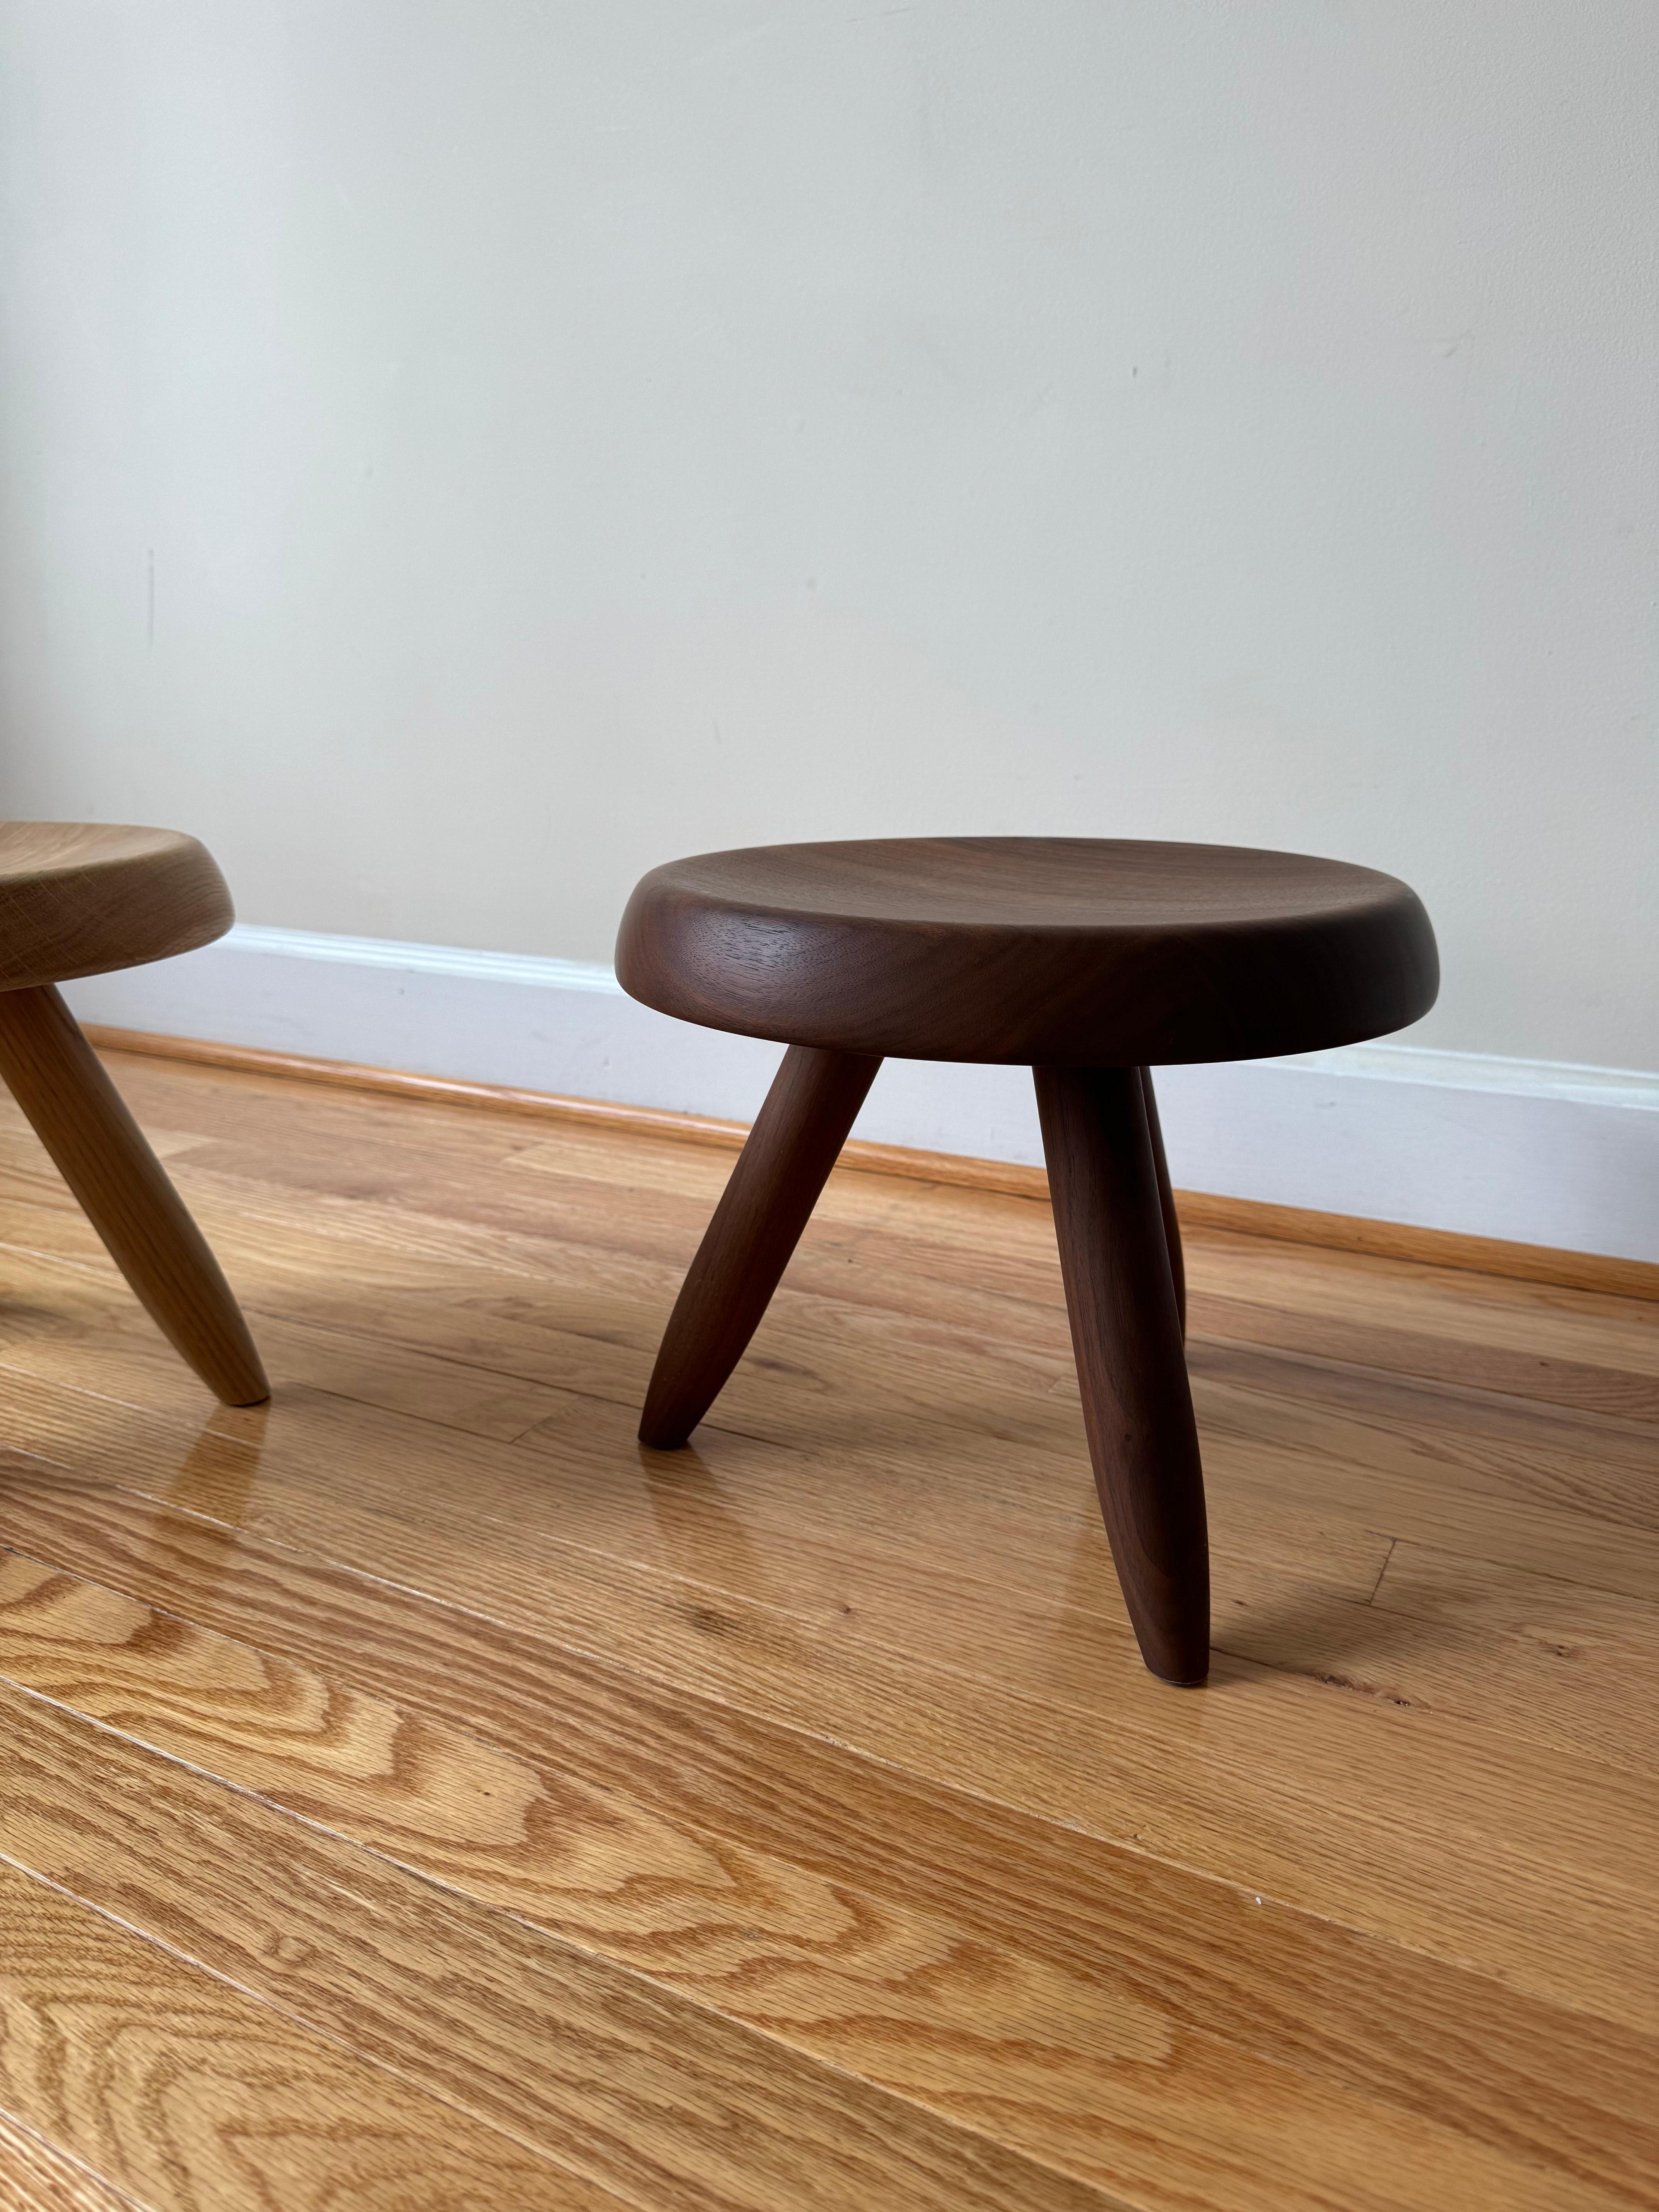 Tabouret Berger (Berger Stool) by Charlotte Perriand for Cassina For Sale 3